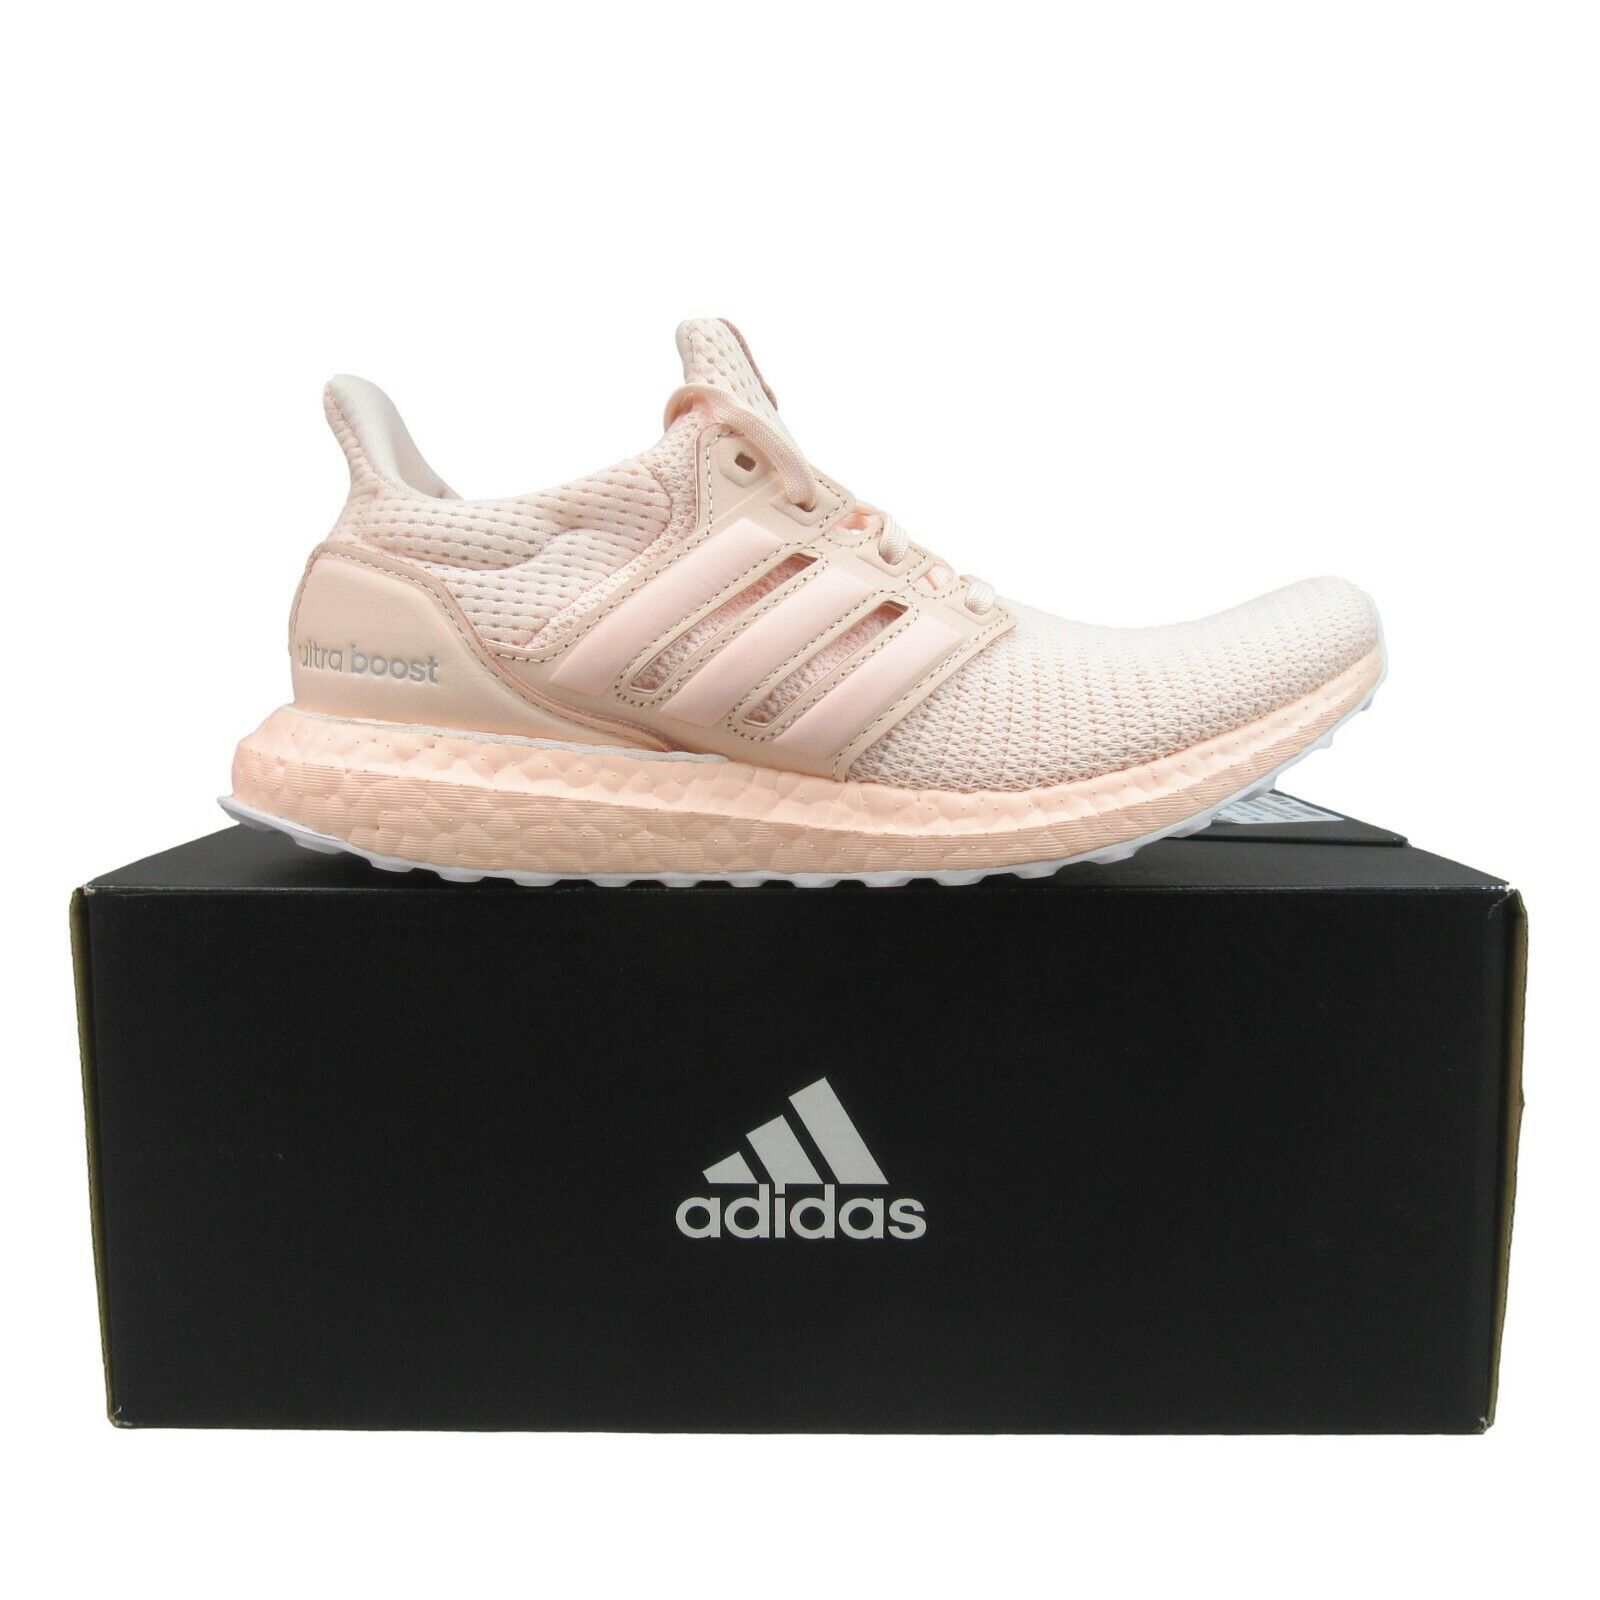 Primary image for Adidas Ultraboost Gym Running Shoes Womens Size 7.5 Pink Tint White NEW FY6828